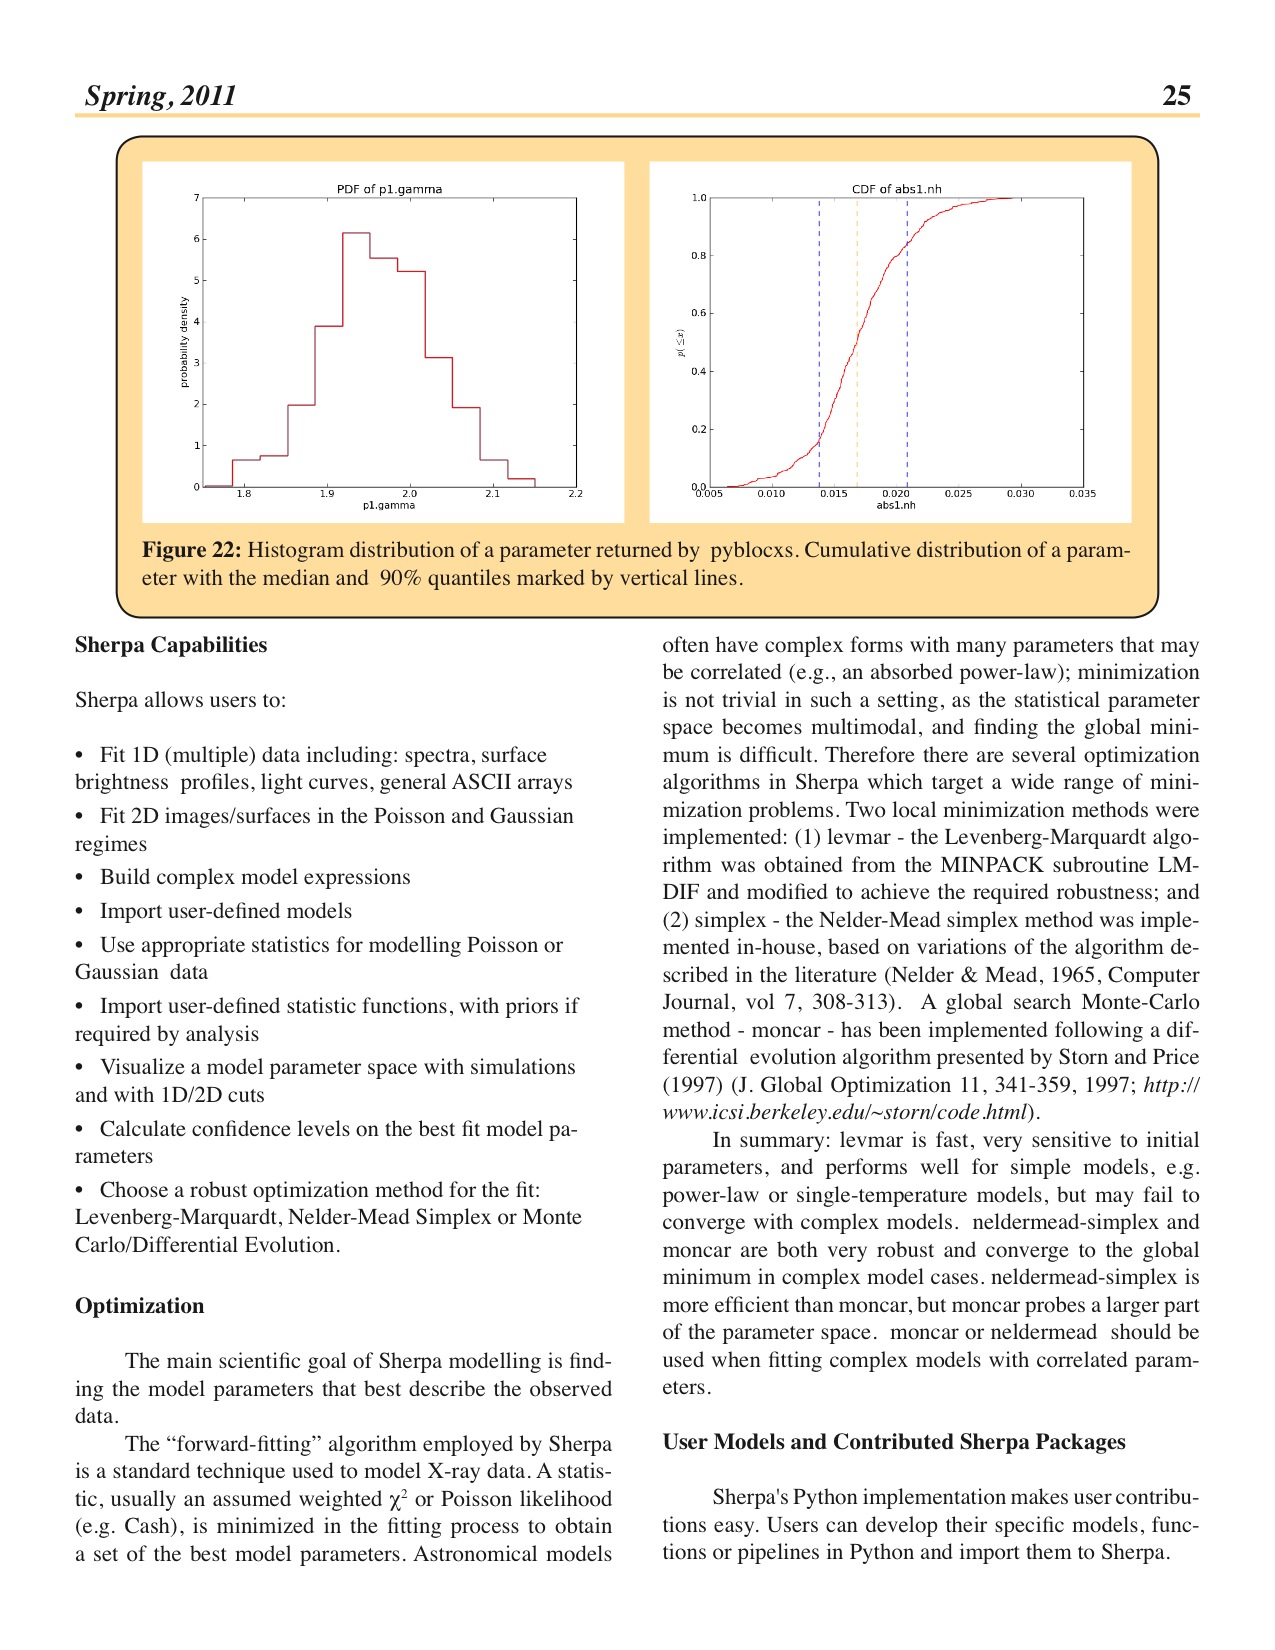 Page 25 of the Chandra Newsletter, issue 18.